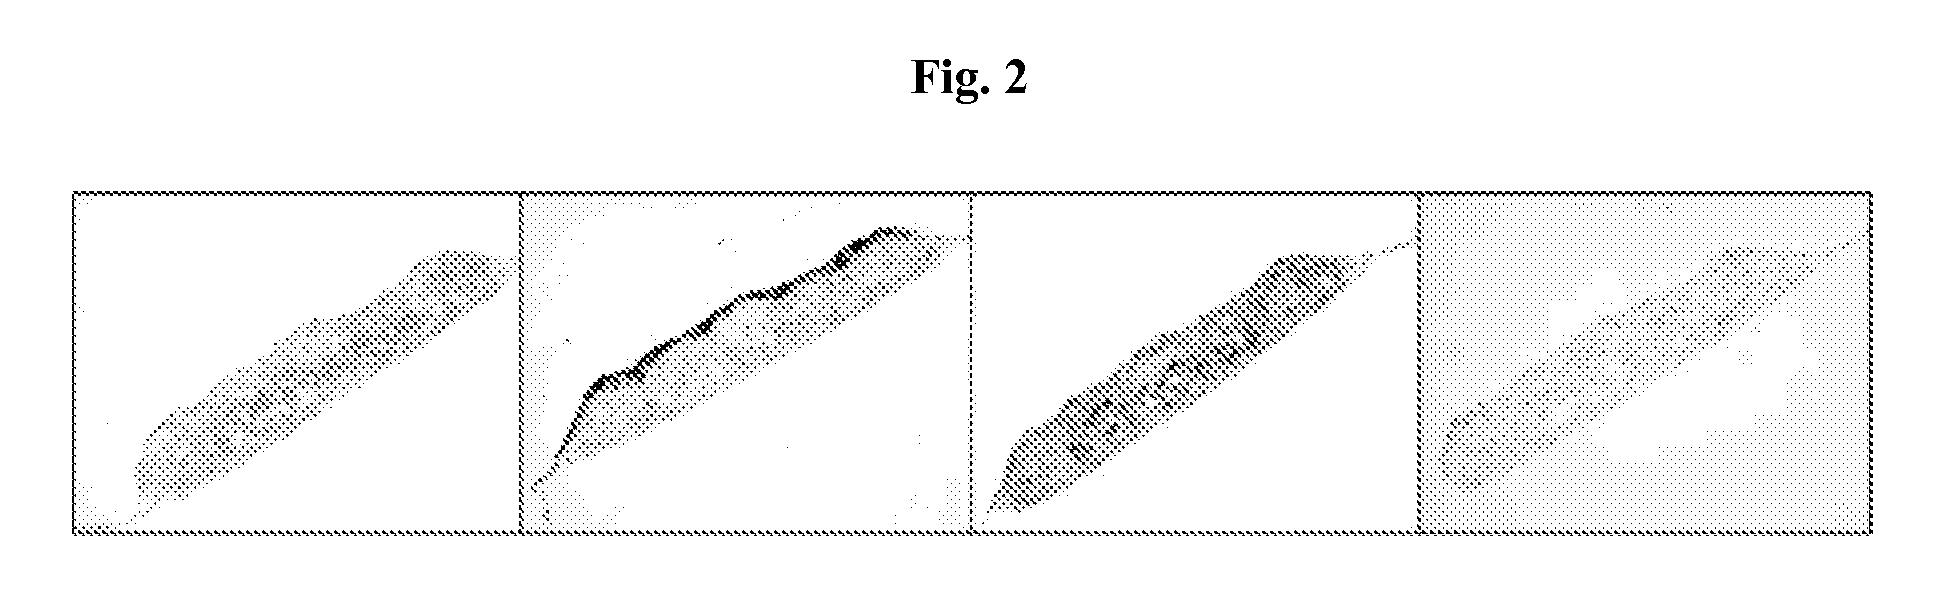 Platform for engineered implantable tissues and organs and methods of making the same